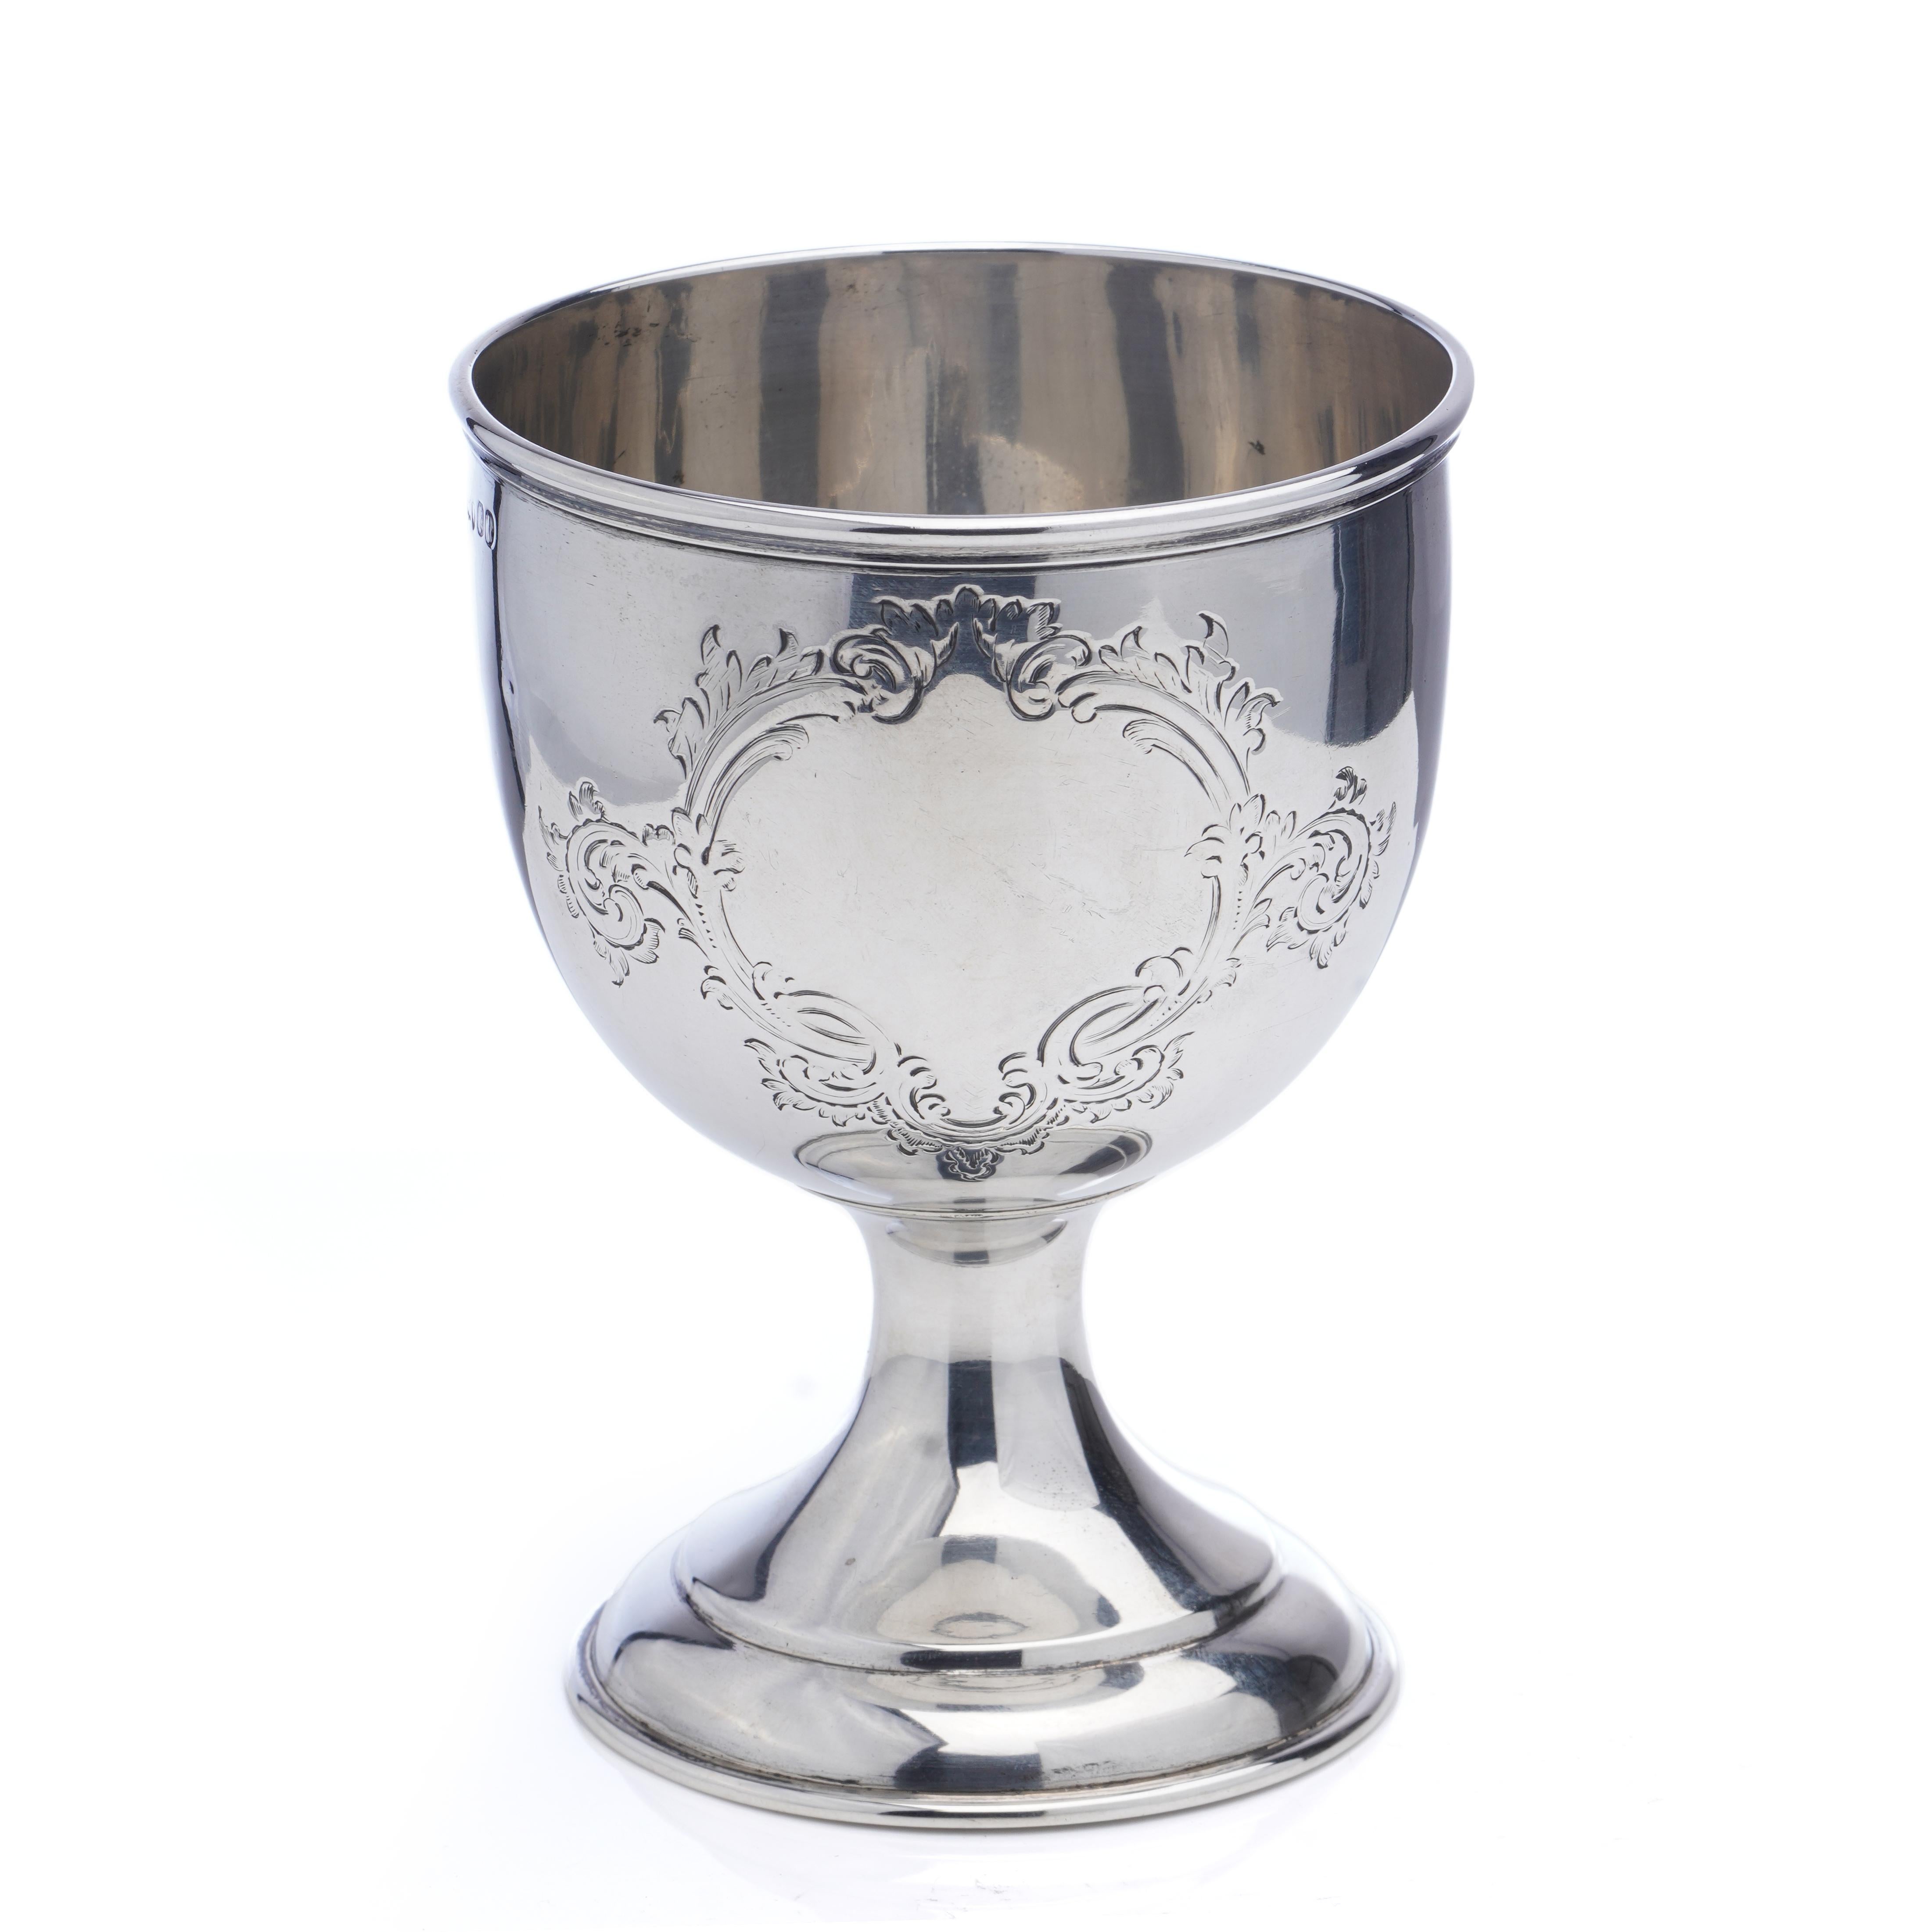 Antique sterling silver Victorian goblet. 
Made in England, London, 1881
Maker: BH 
Fully hallmarked.

Dimensions - 
Size: diameter x height: 9.7 x 13 cm 
Weight: 162 grams

Condition: Pre-owned, minor signs of usage, good condition overall.